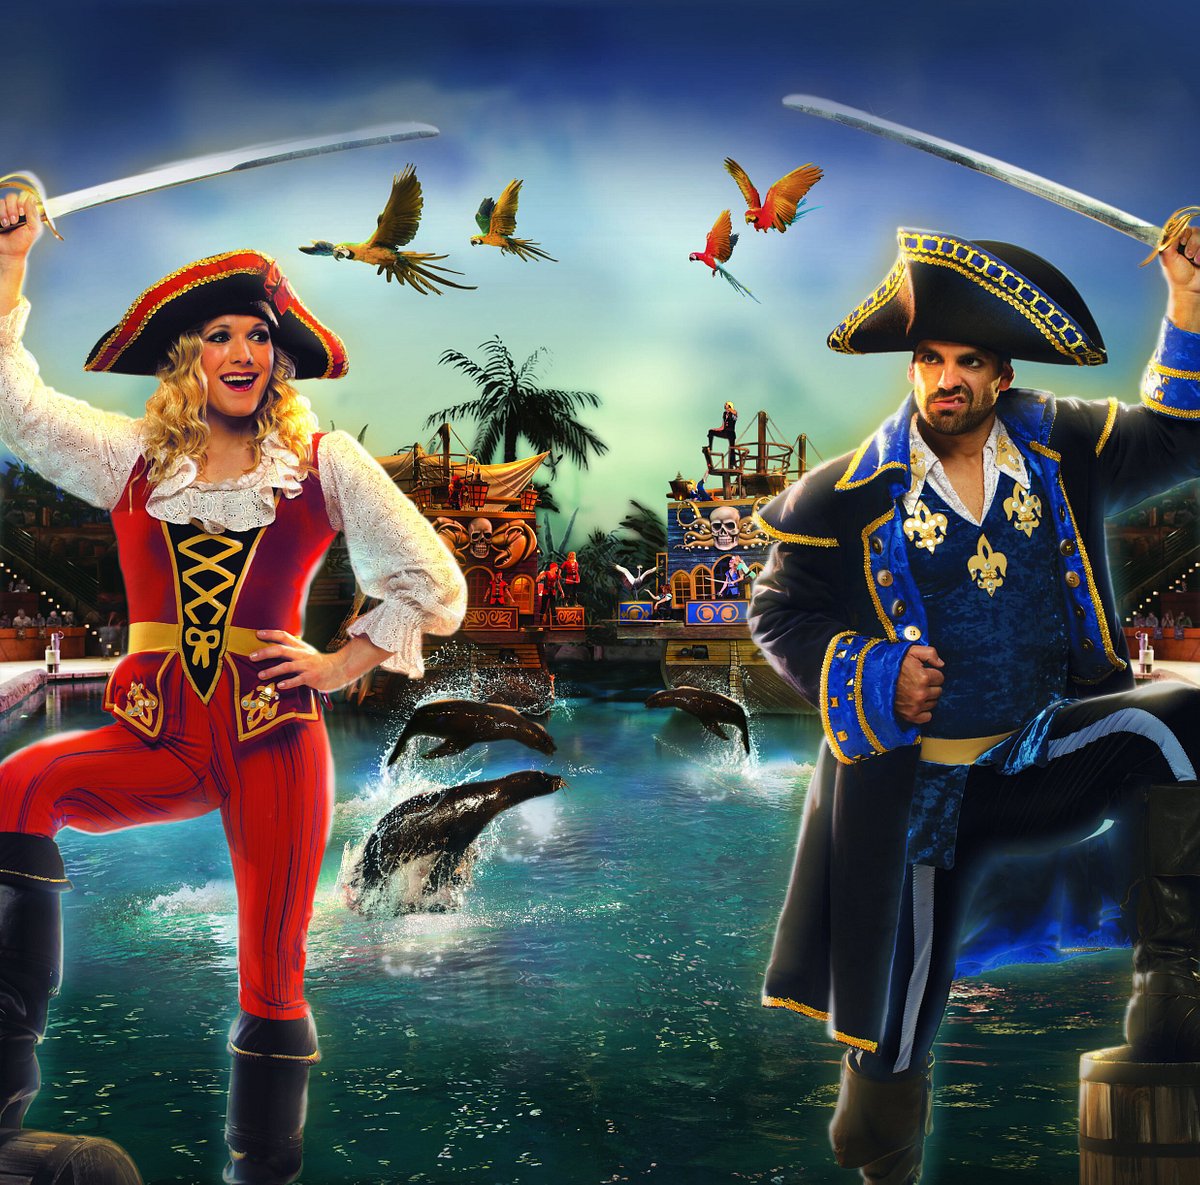 Pirates Voyage (Myrtle Beach) All You Need to Know BEFORE You Go